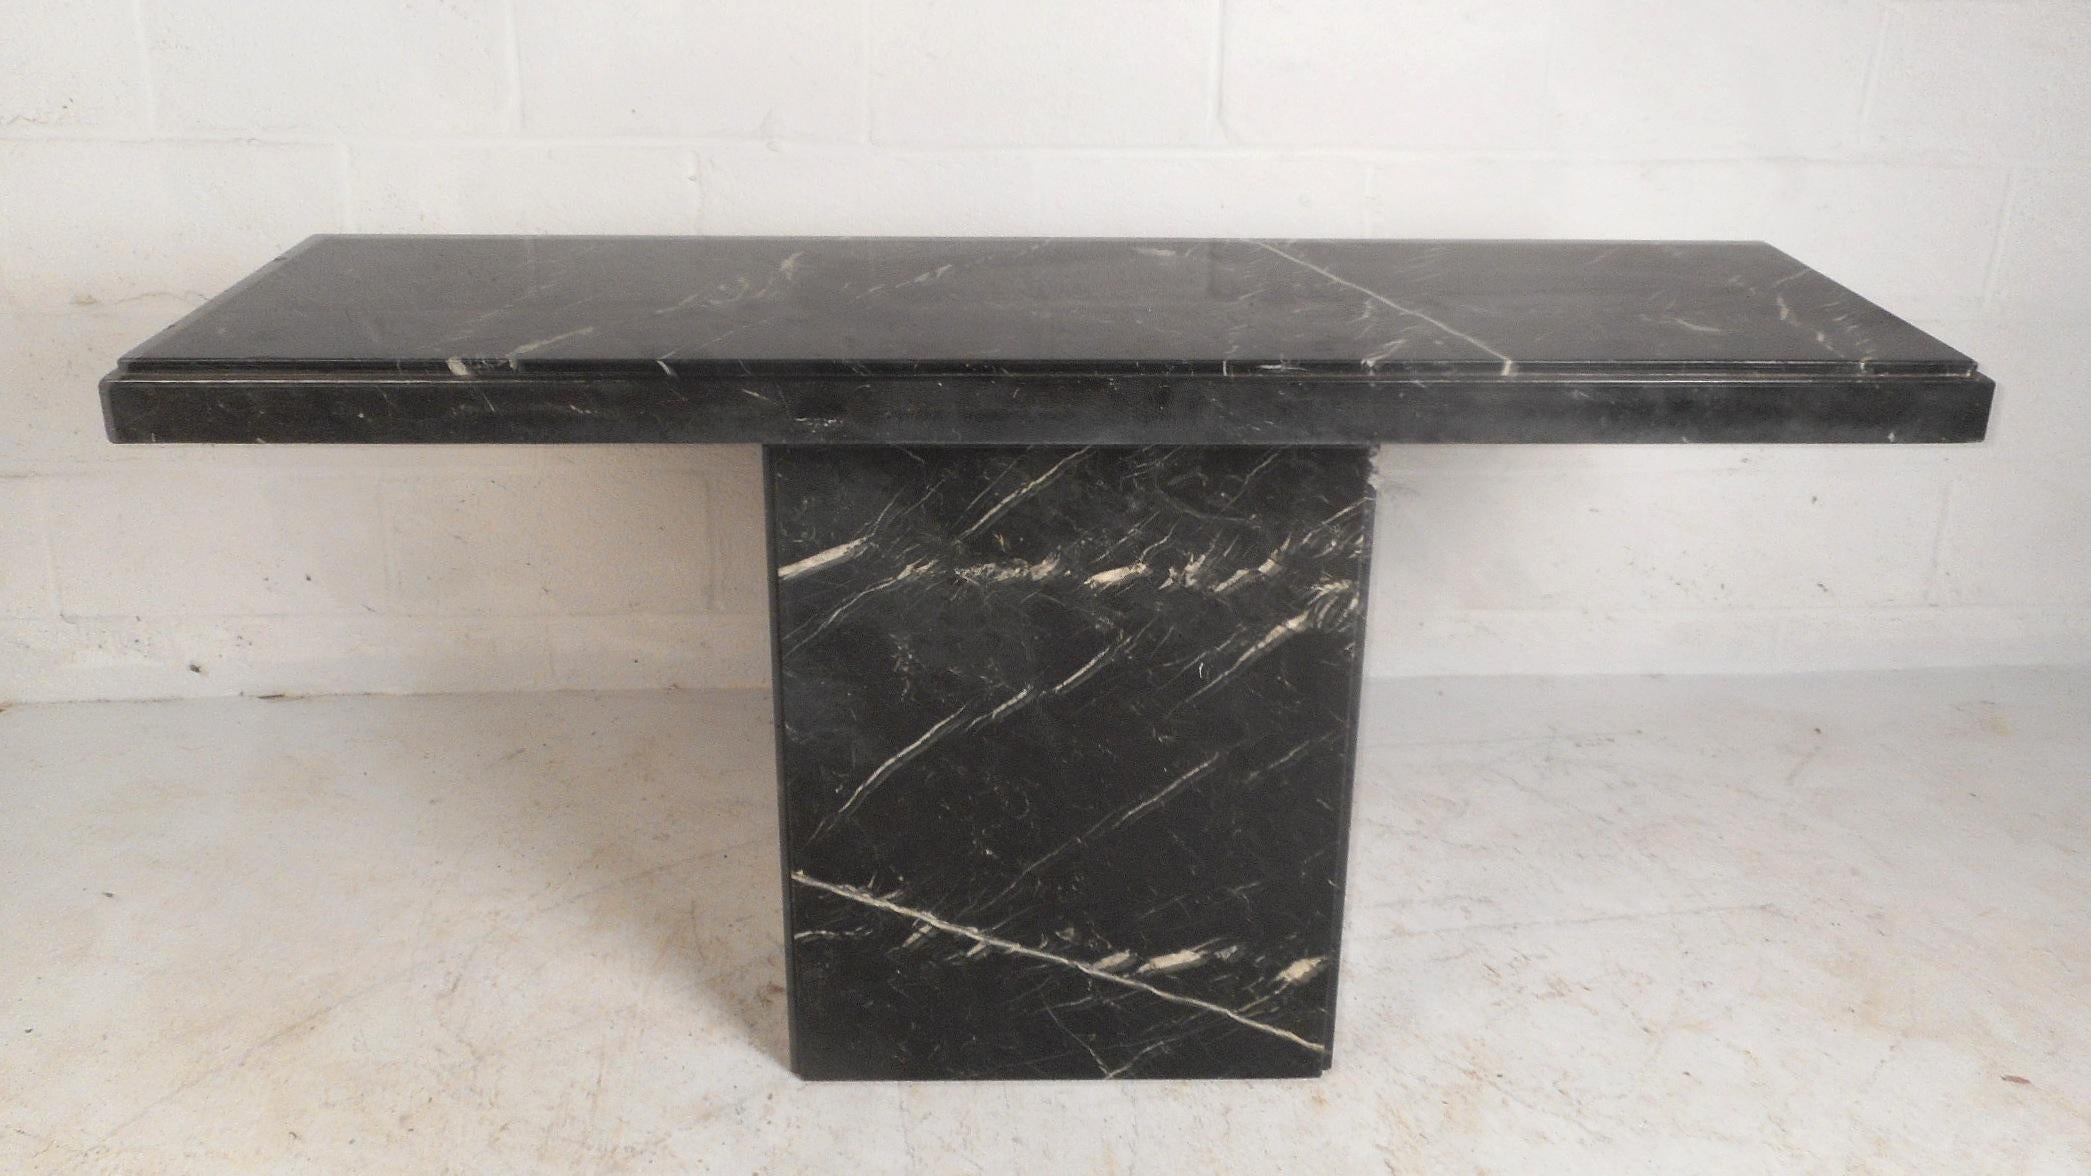 This stunning vintage modern console table features a black marble pedestal base with a rectangular black marble slab top. An elegant piece that looks amazing in any entryway, hallway, or behind the sofa. The unusual 